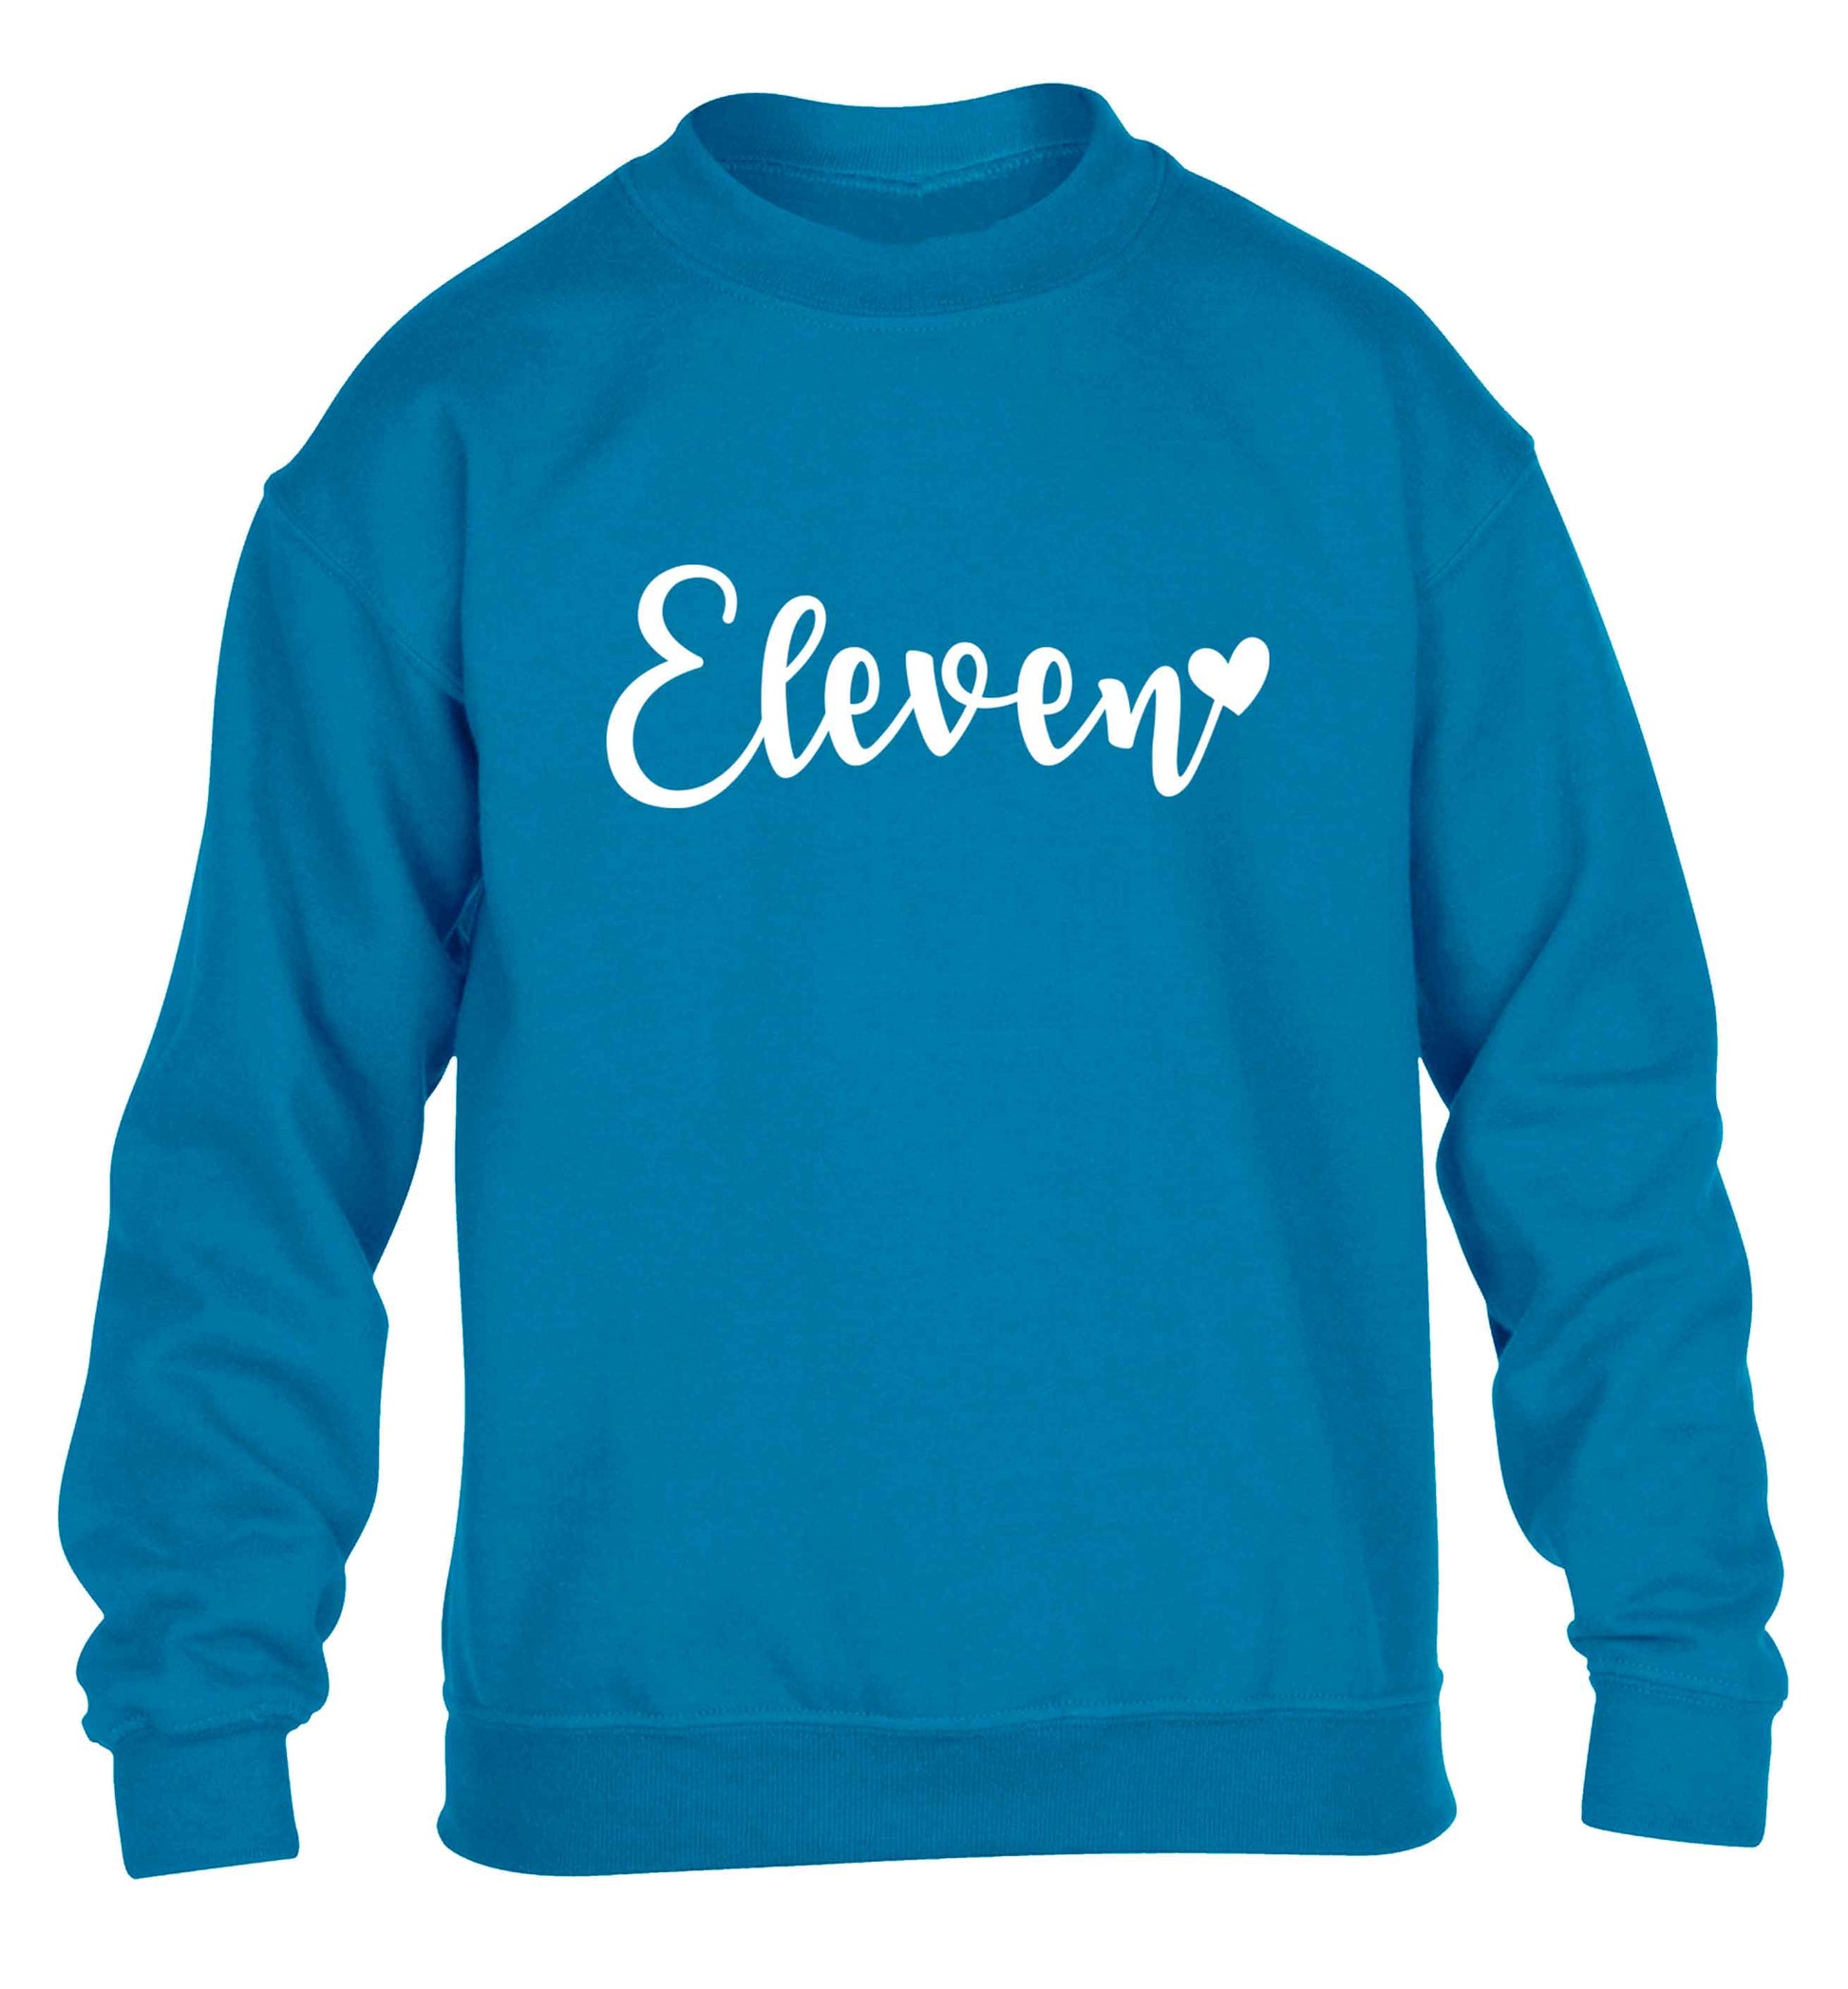 Eleven and heart! children's blue sweater 12-13 Years